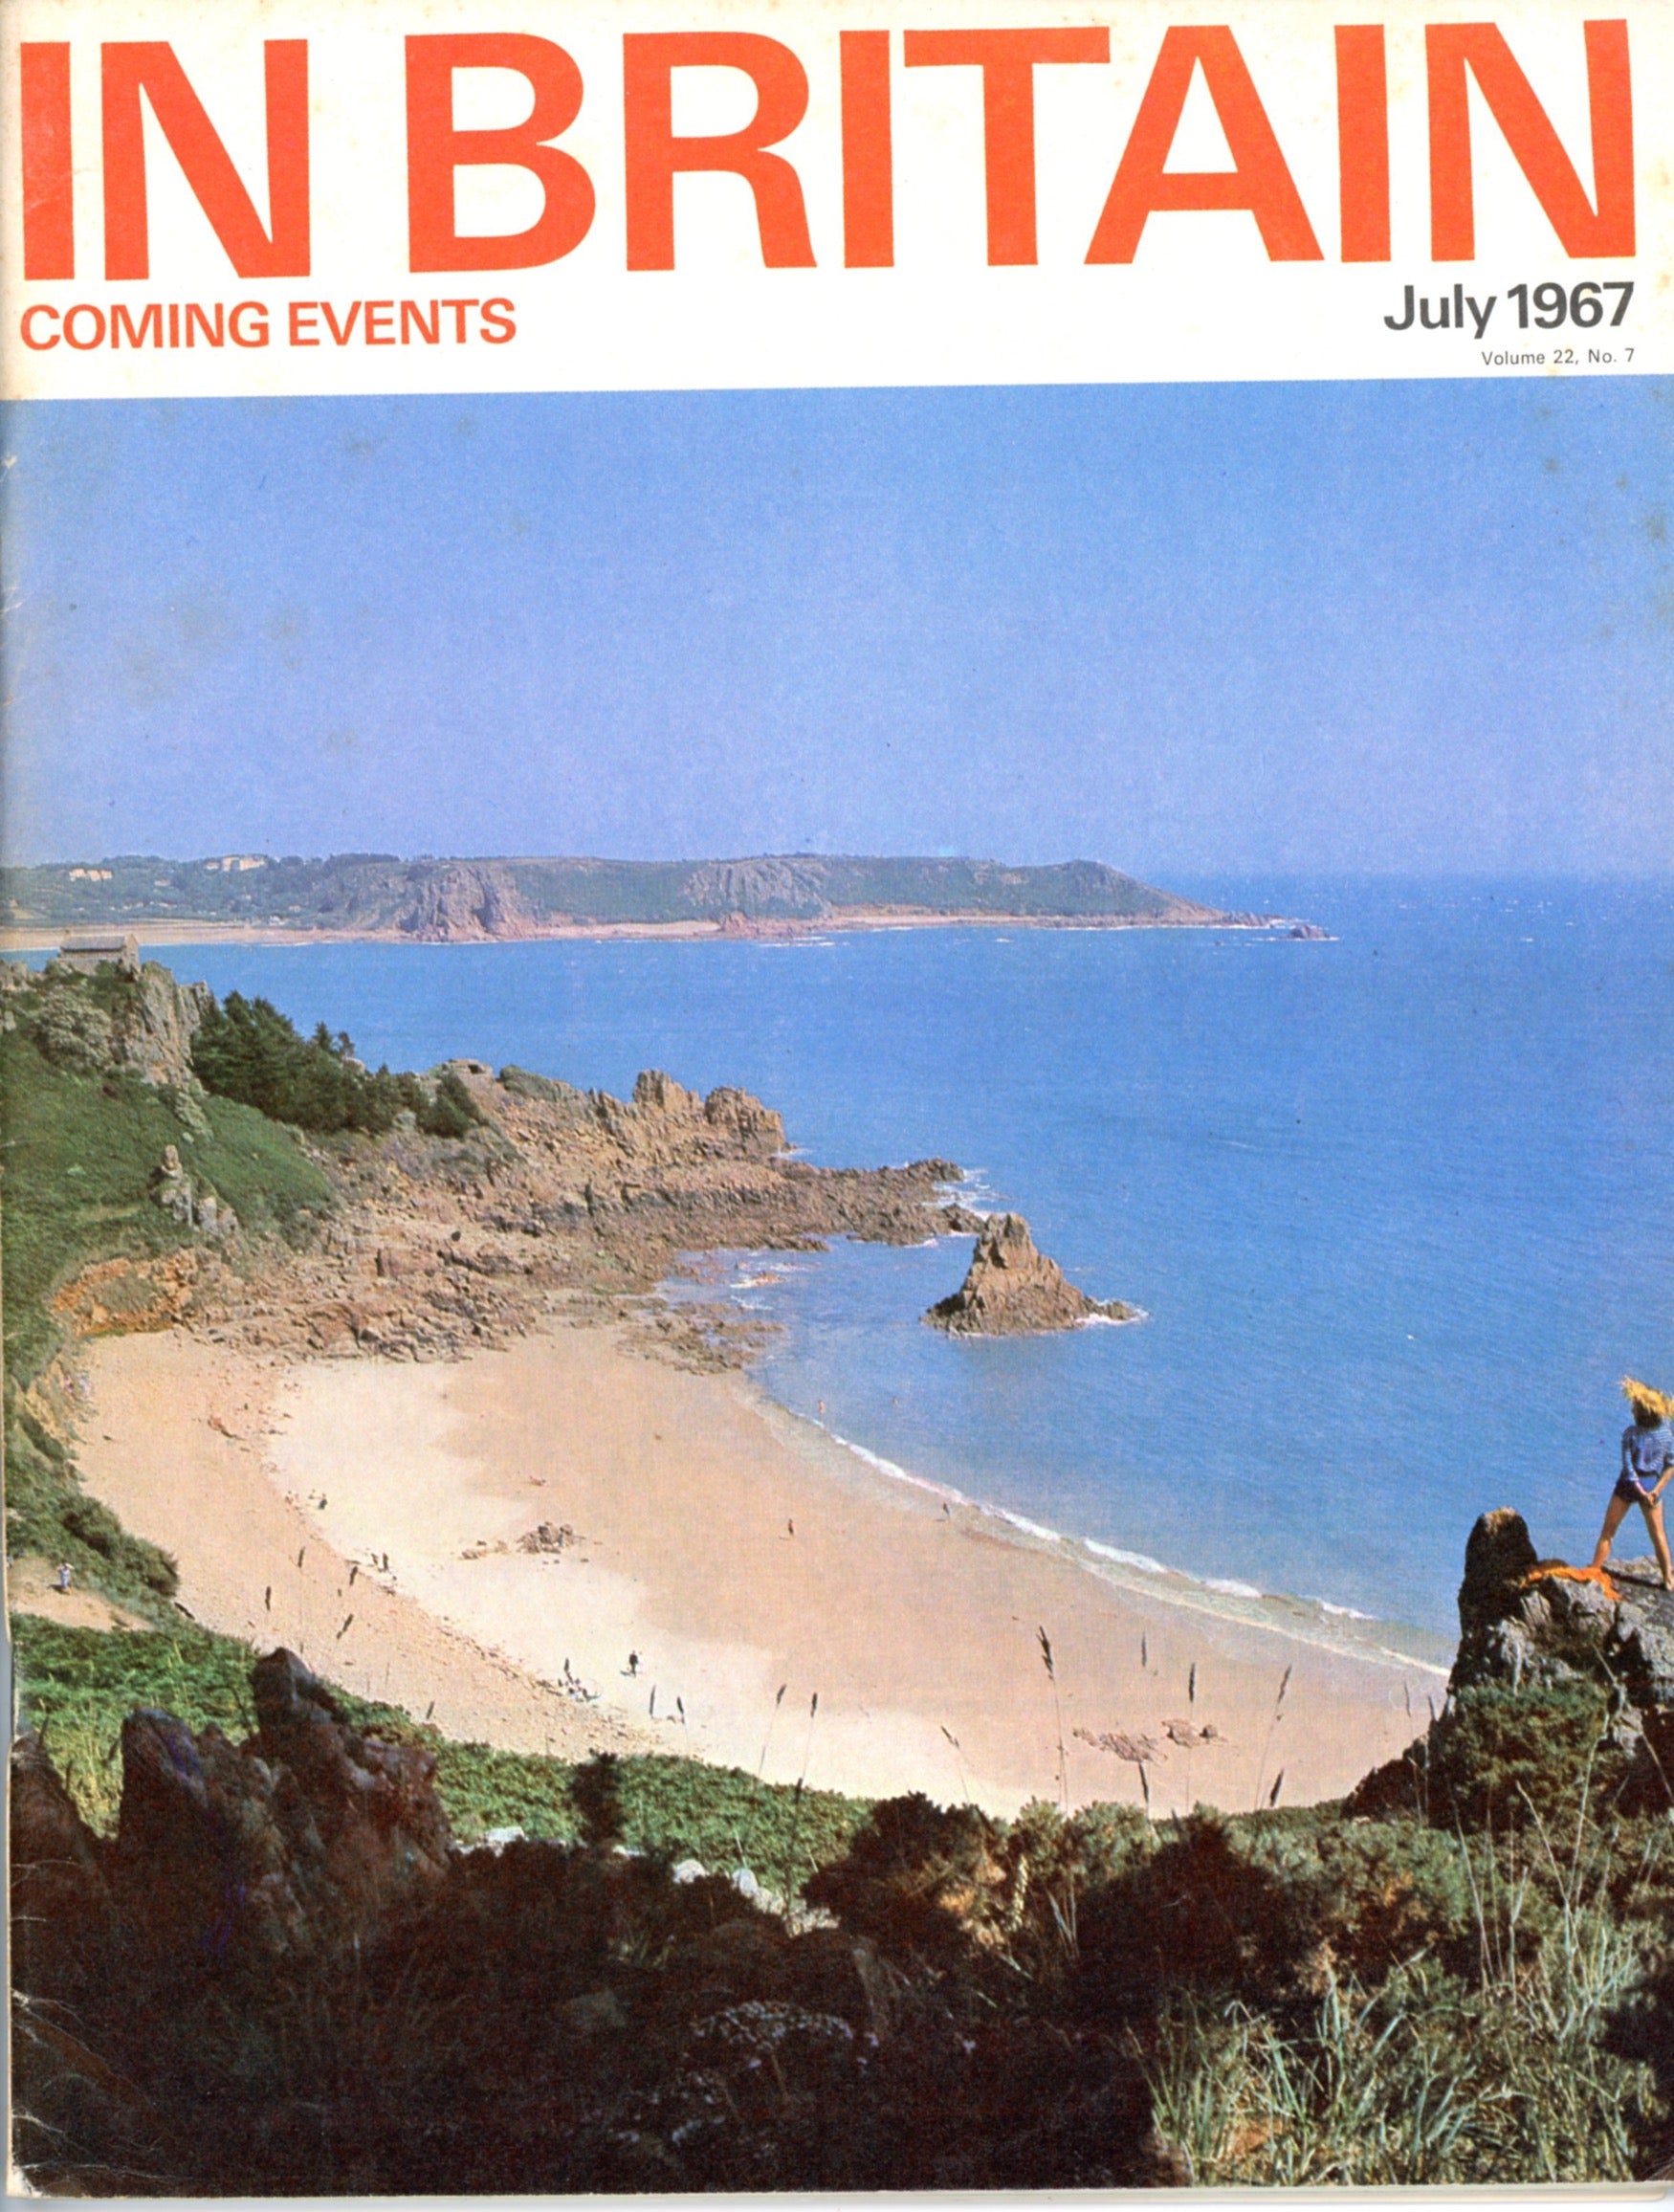 COMING EVENTS IN BRITAIN Vintage Travel Magazines Single Issues © July 1967